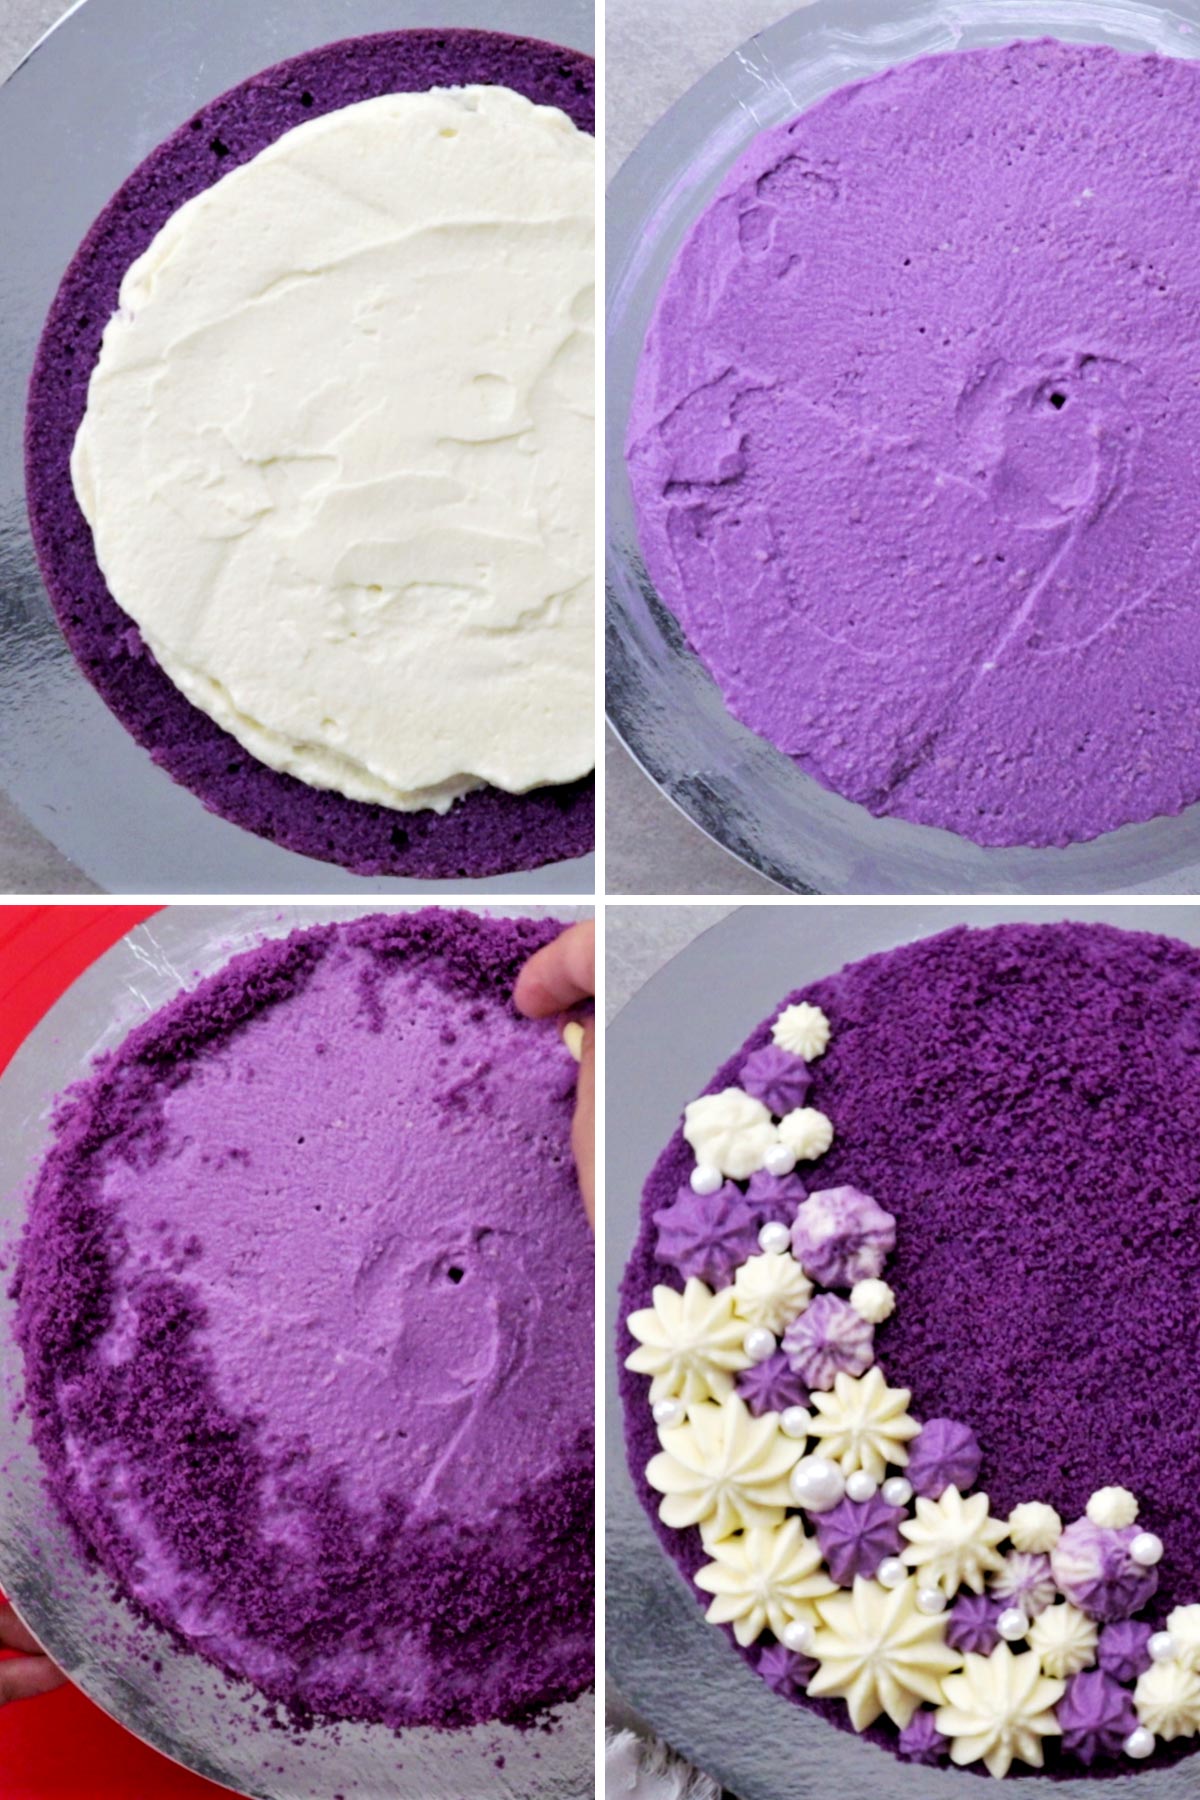 How to decorate your Ube Cake.